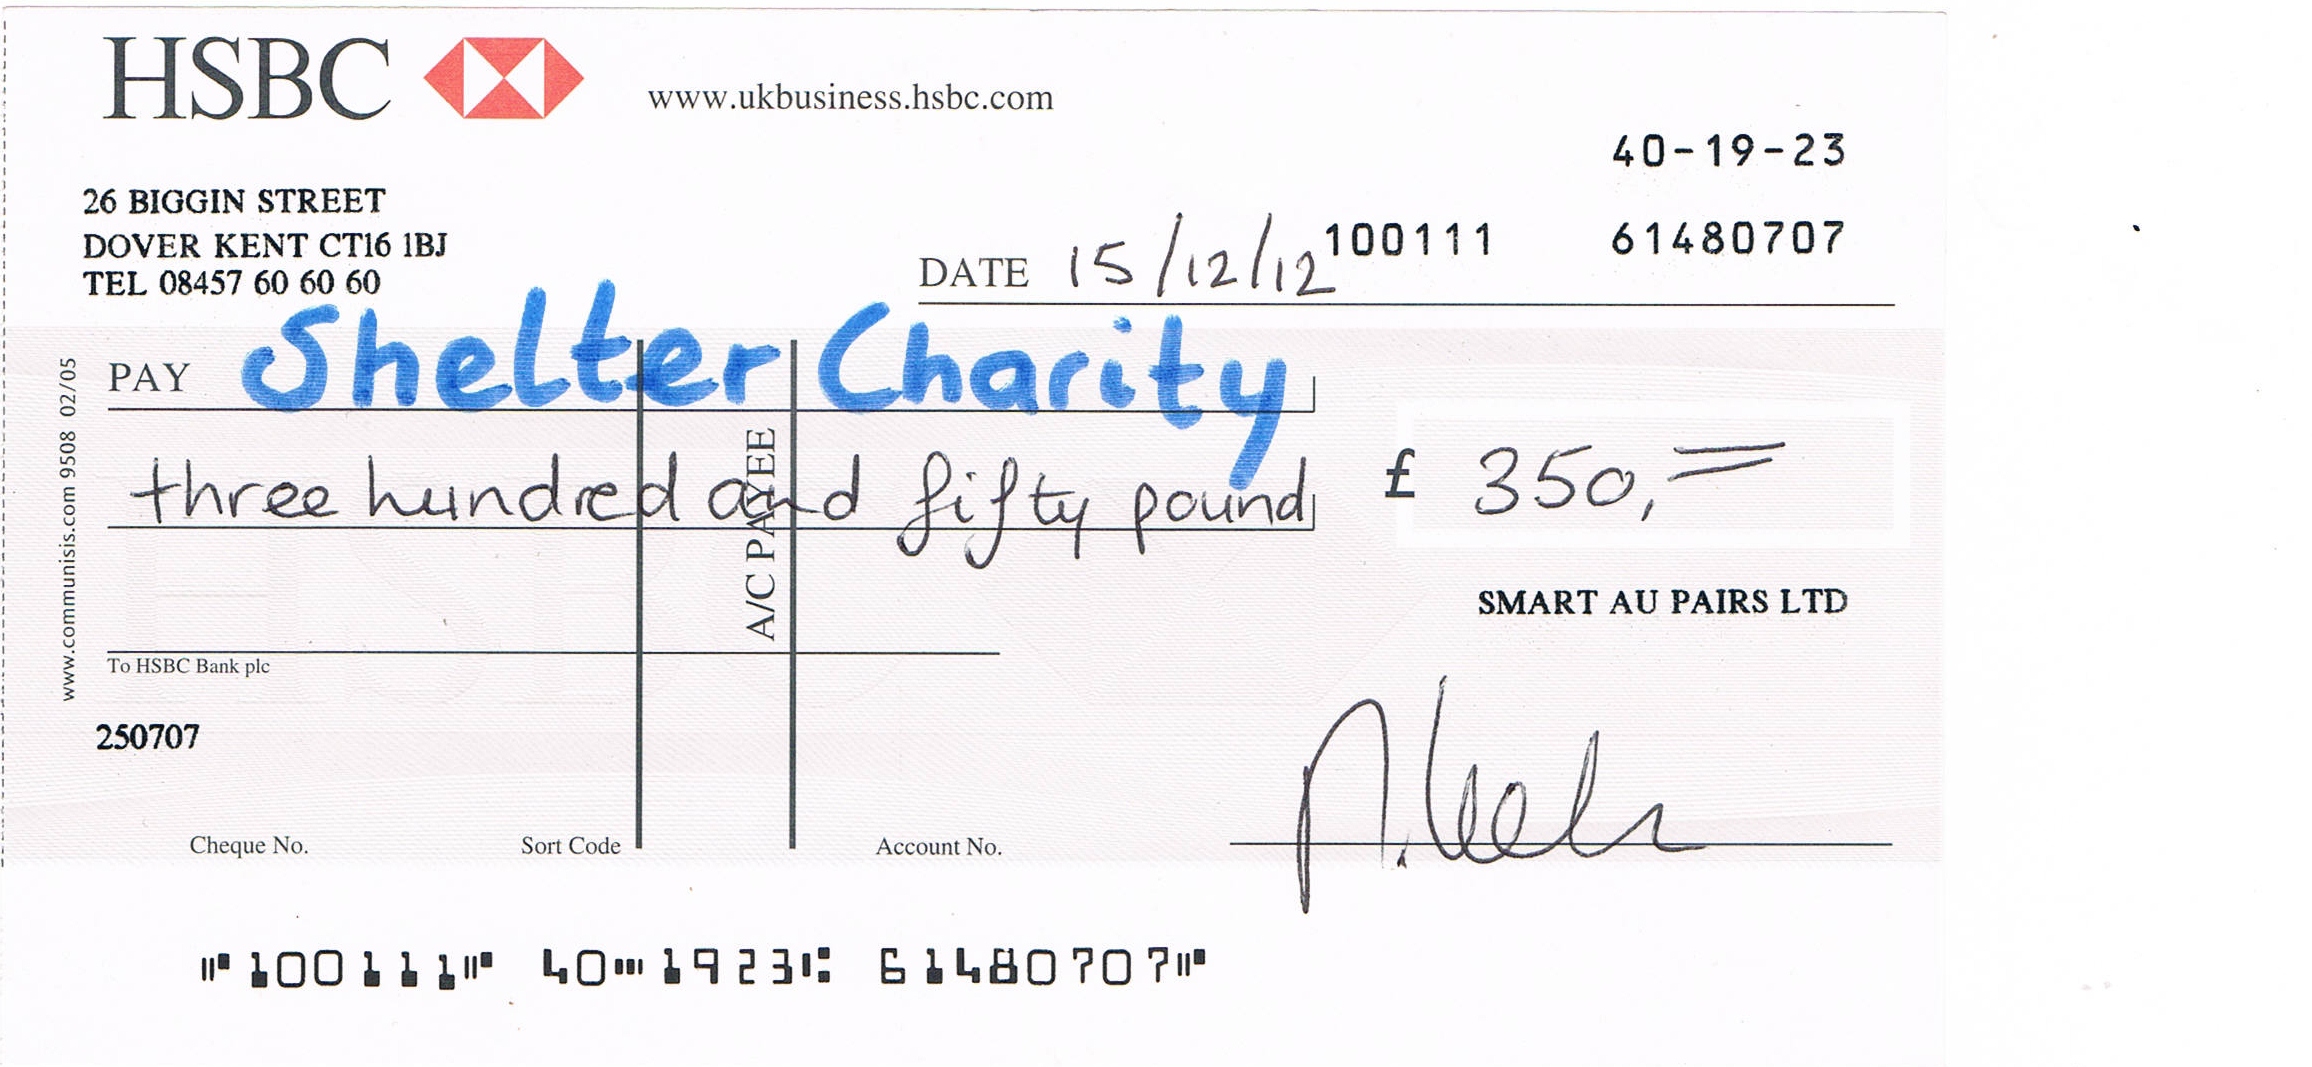 How to write a cheque in the uk